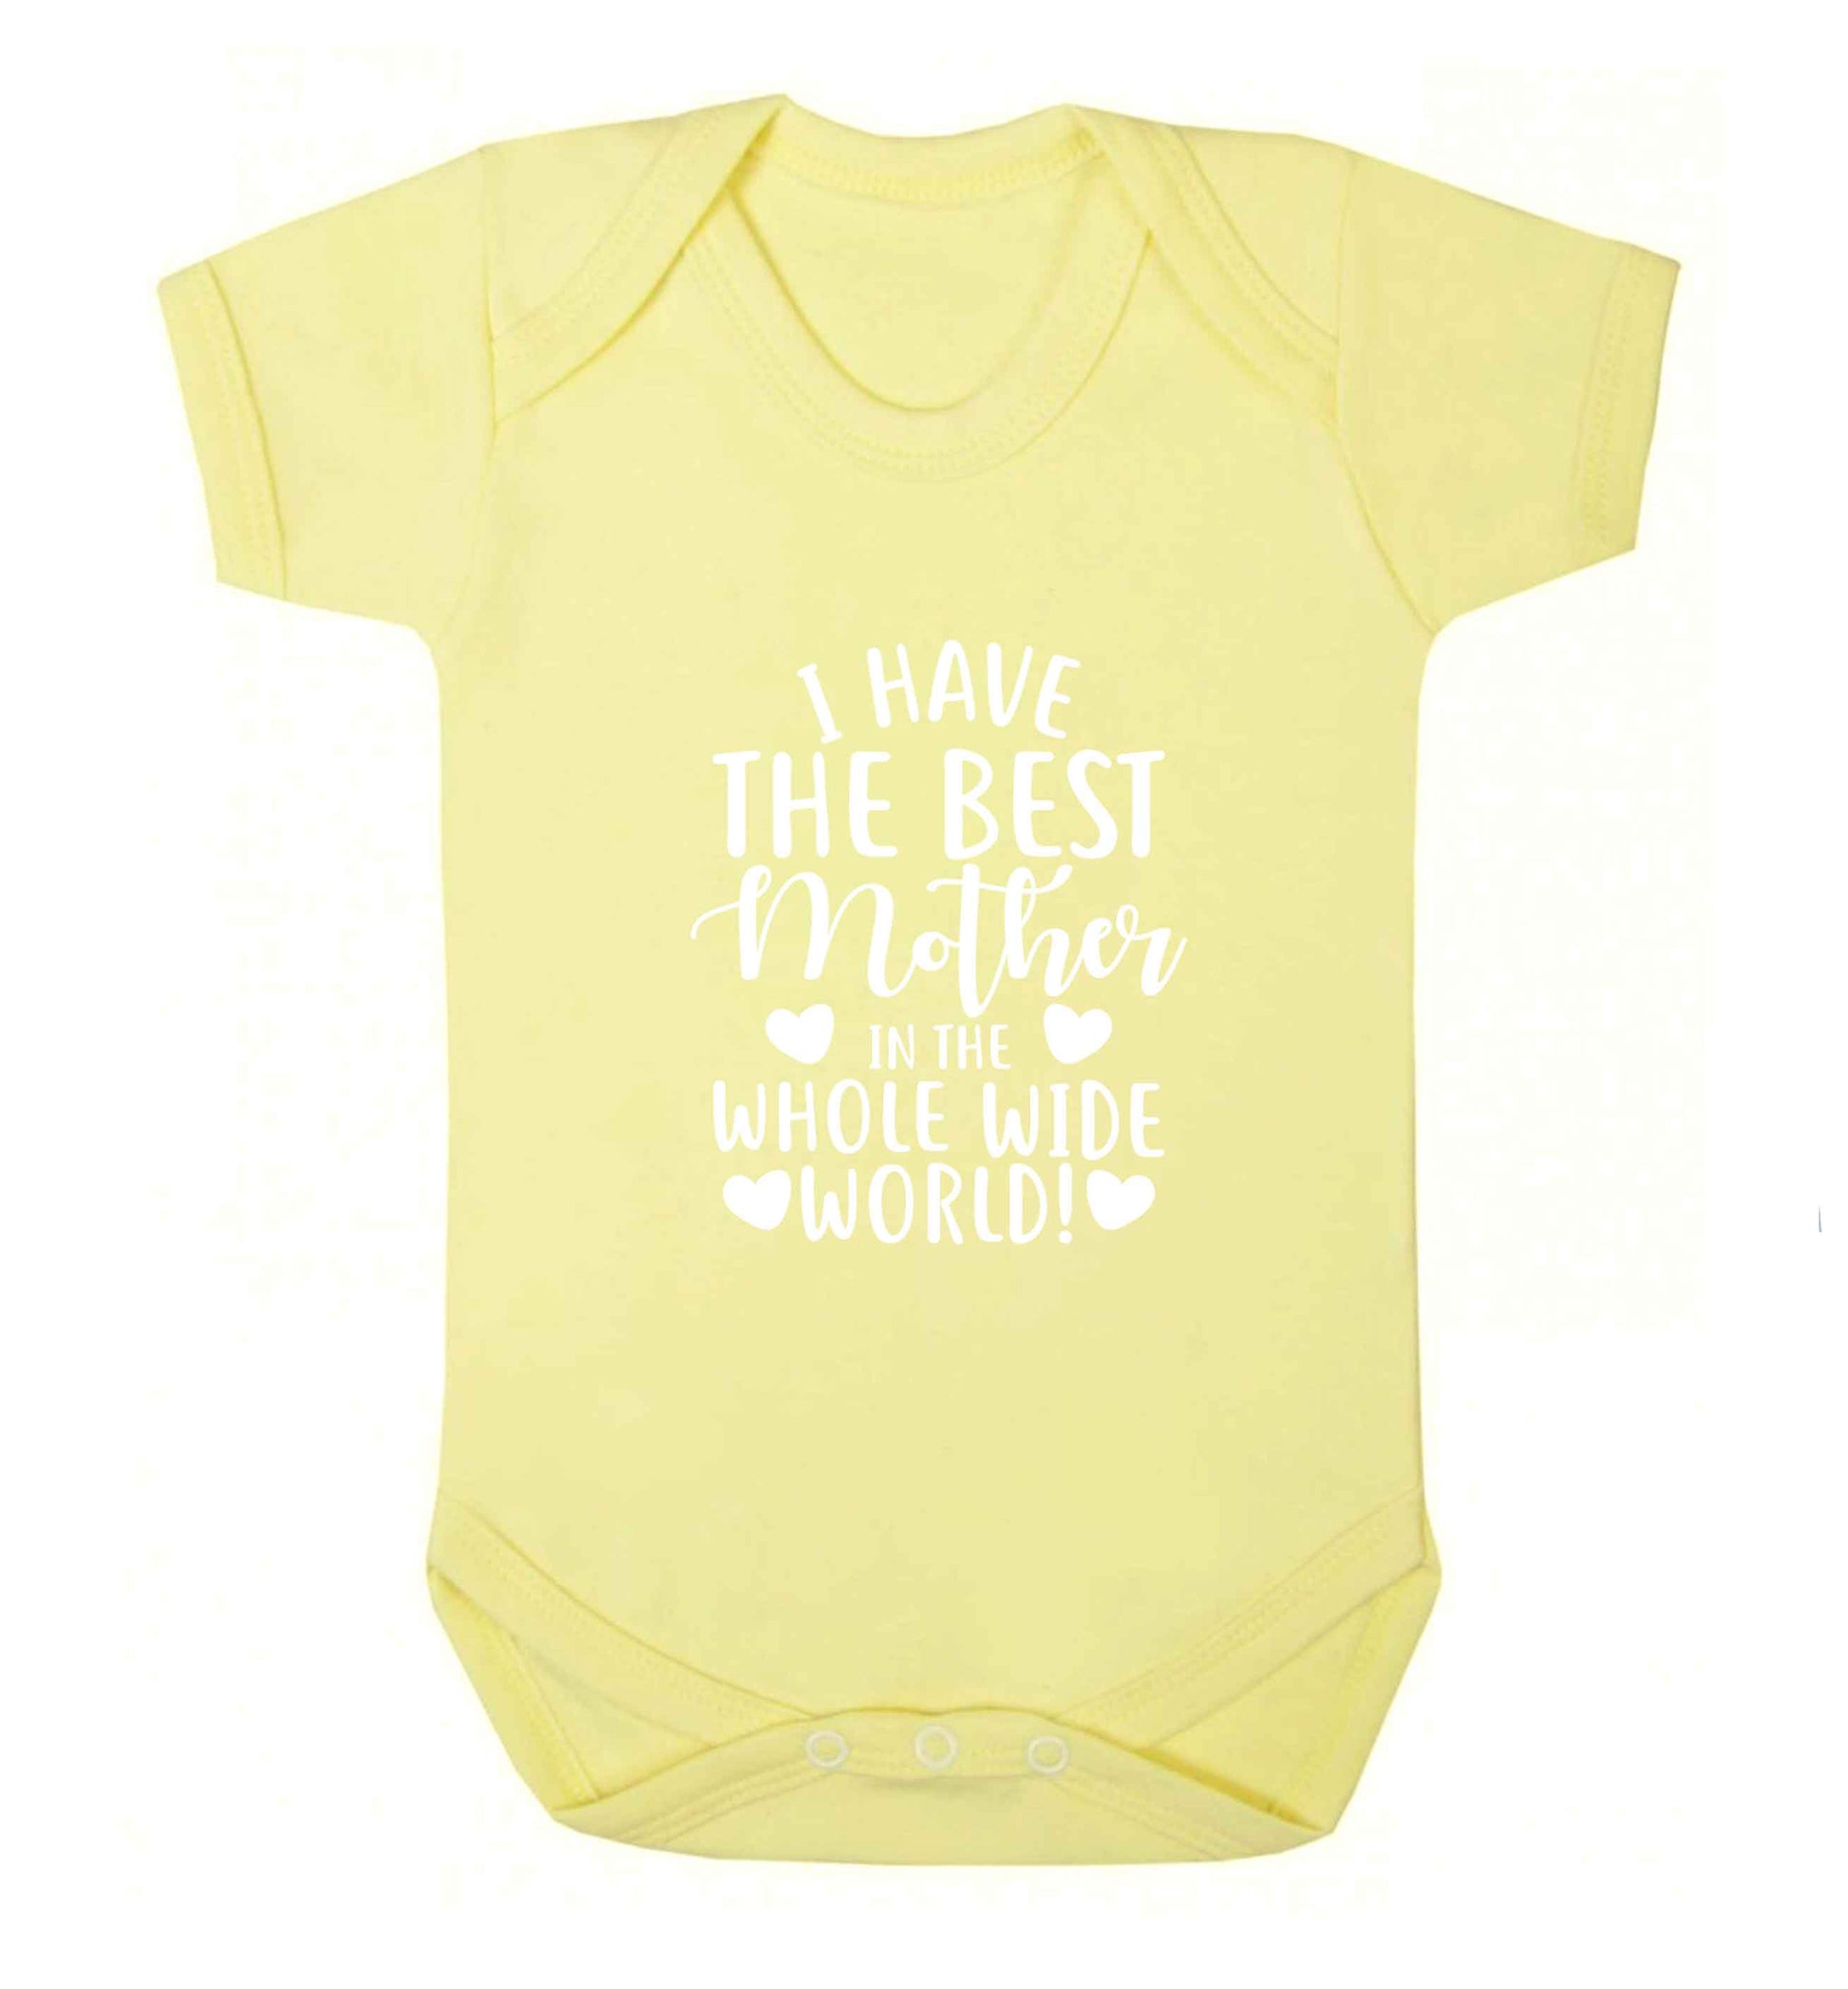 I have the best mother in the whole wide world baby vest pale yellow 18-24 months